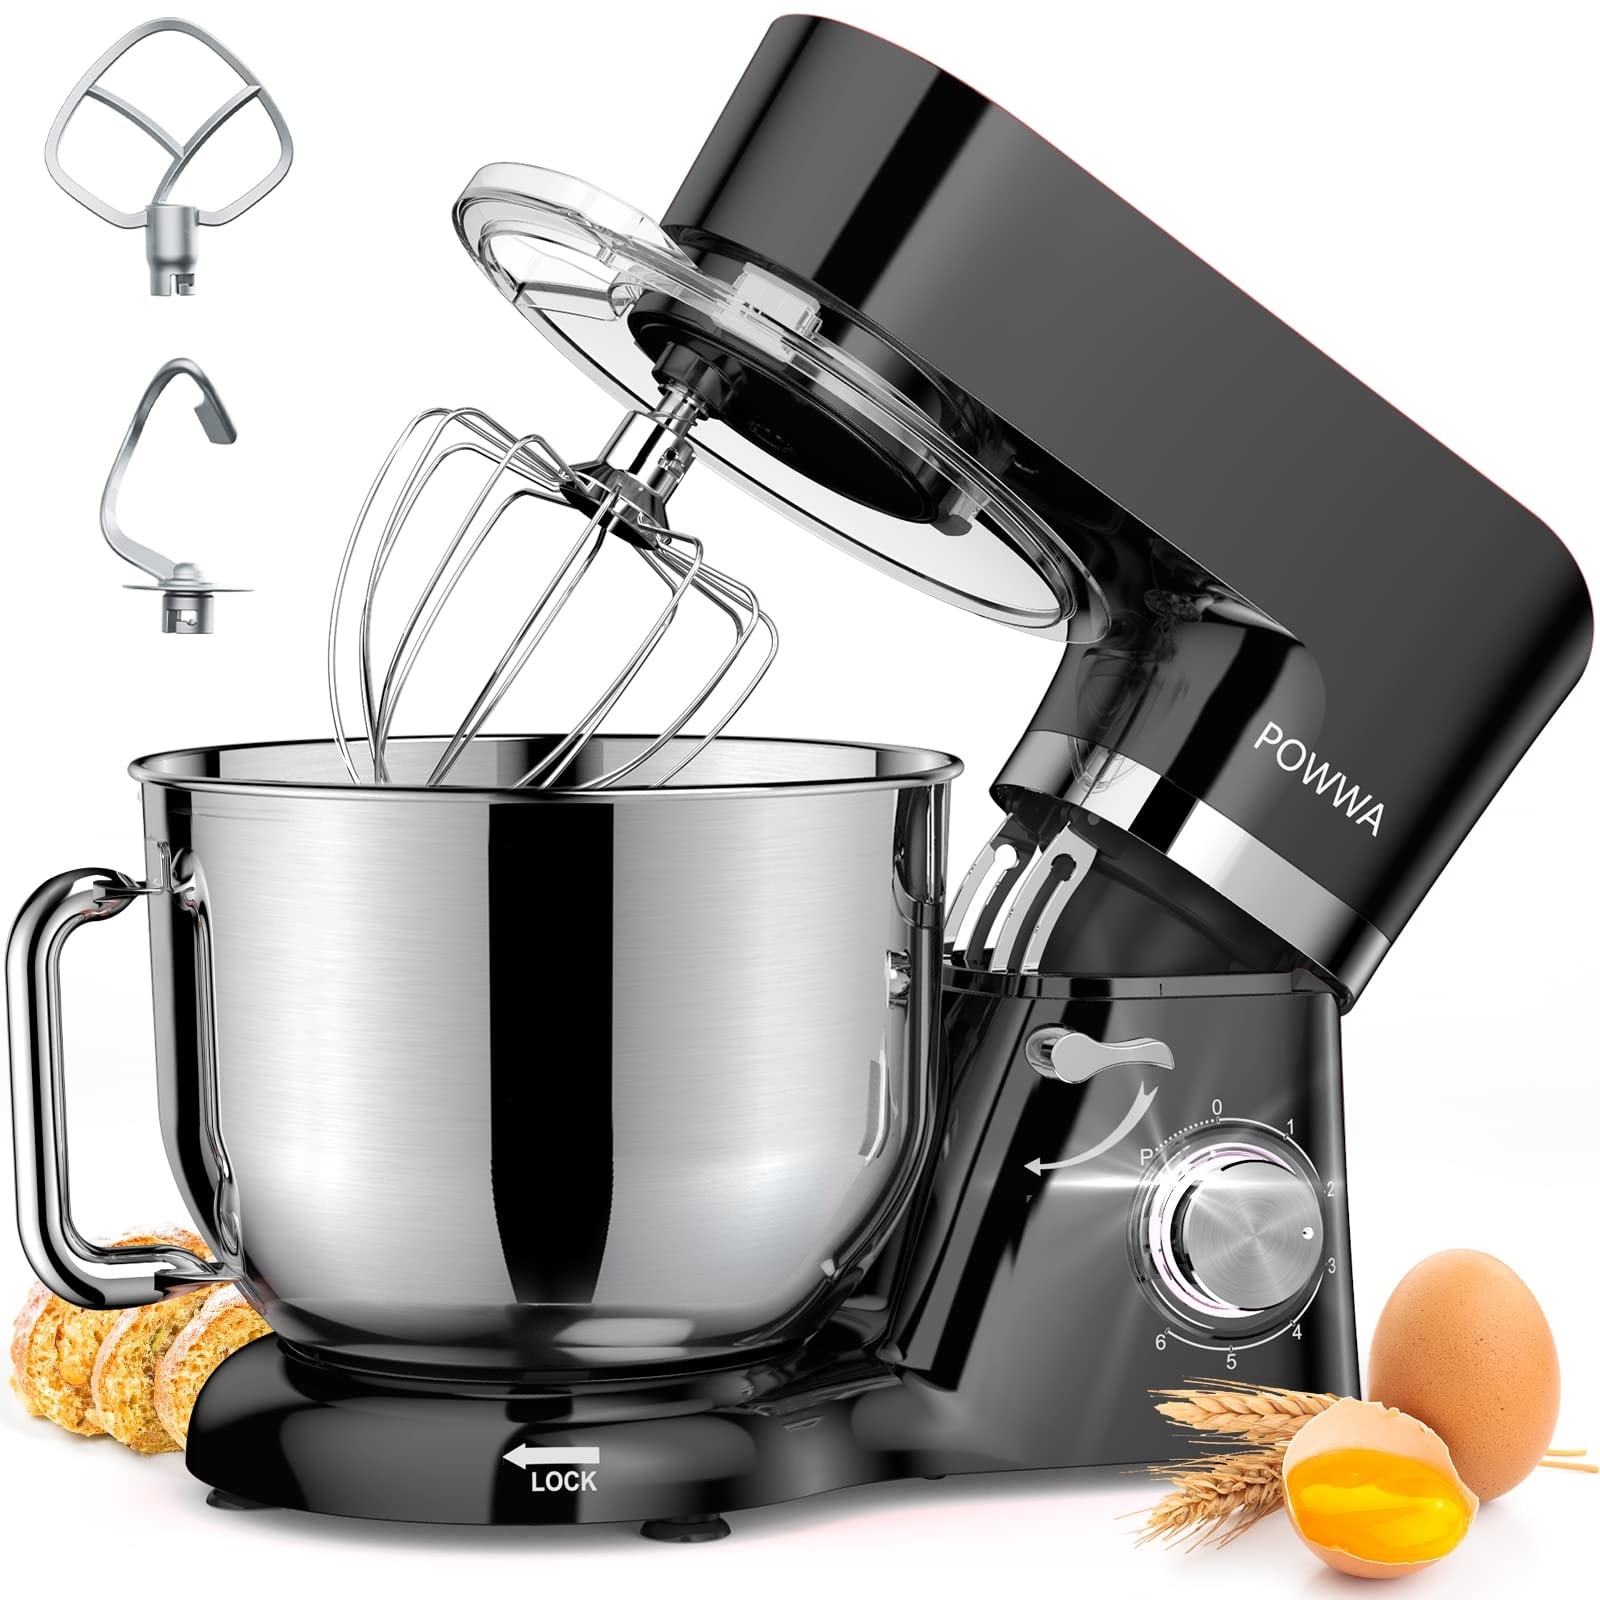 https://ak1.ostkcdn.com/images/products/is/images/direct/b7c70adbc4bae2f1a492c0c794ba75f8d27ad285/6.5-Quart-Electric-Mixer%2C-6%2B1-Speed-660W-Tilt-Head-Kitchen-Food-Mixers-with-Whisk%2C-Dough-Hook%2C-Mixing-Beater-%26-Splash-Guard.jpg